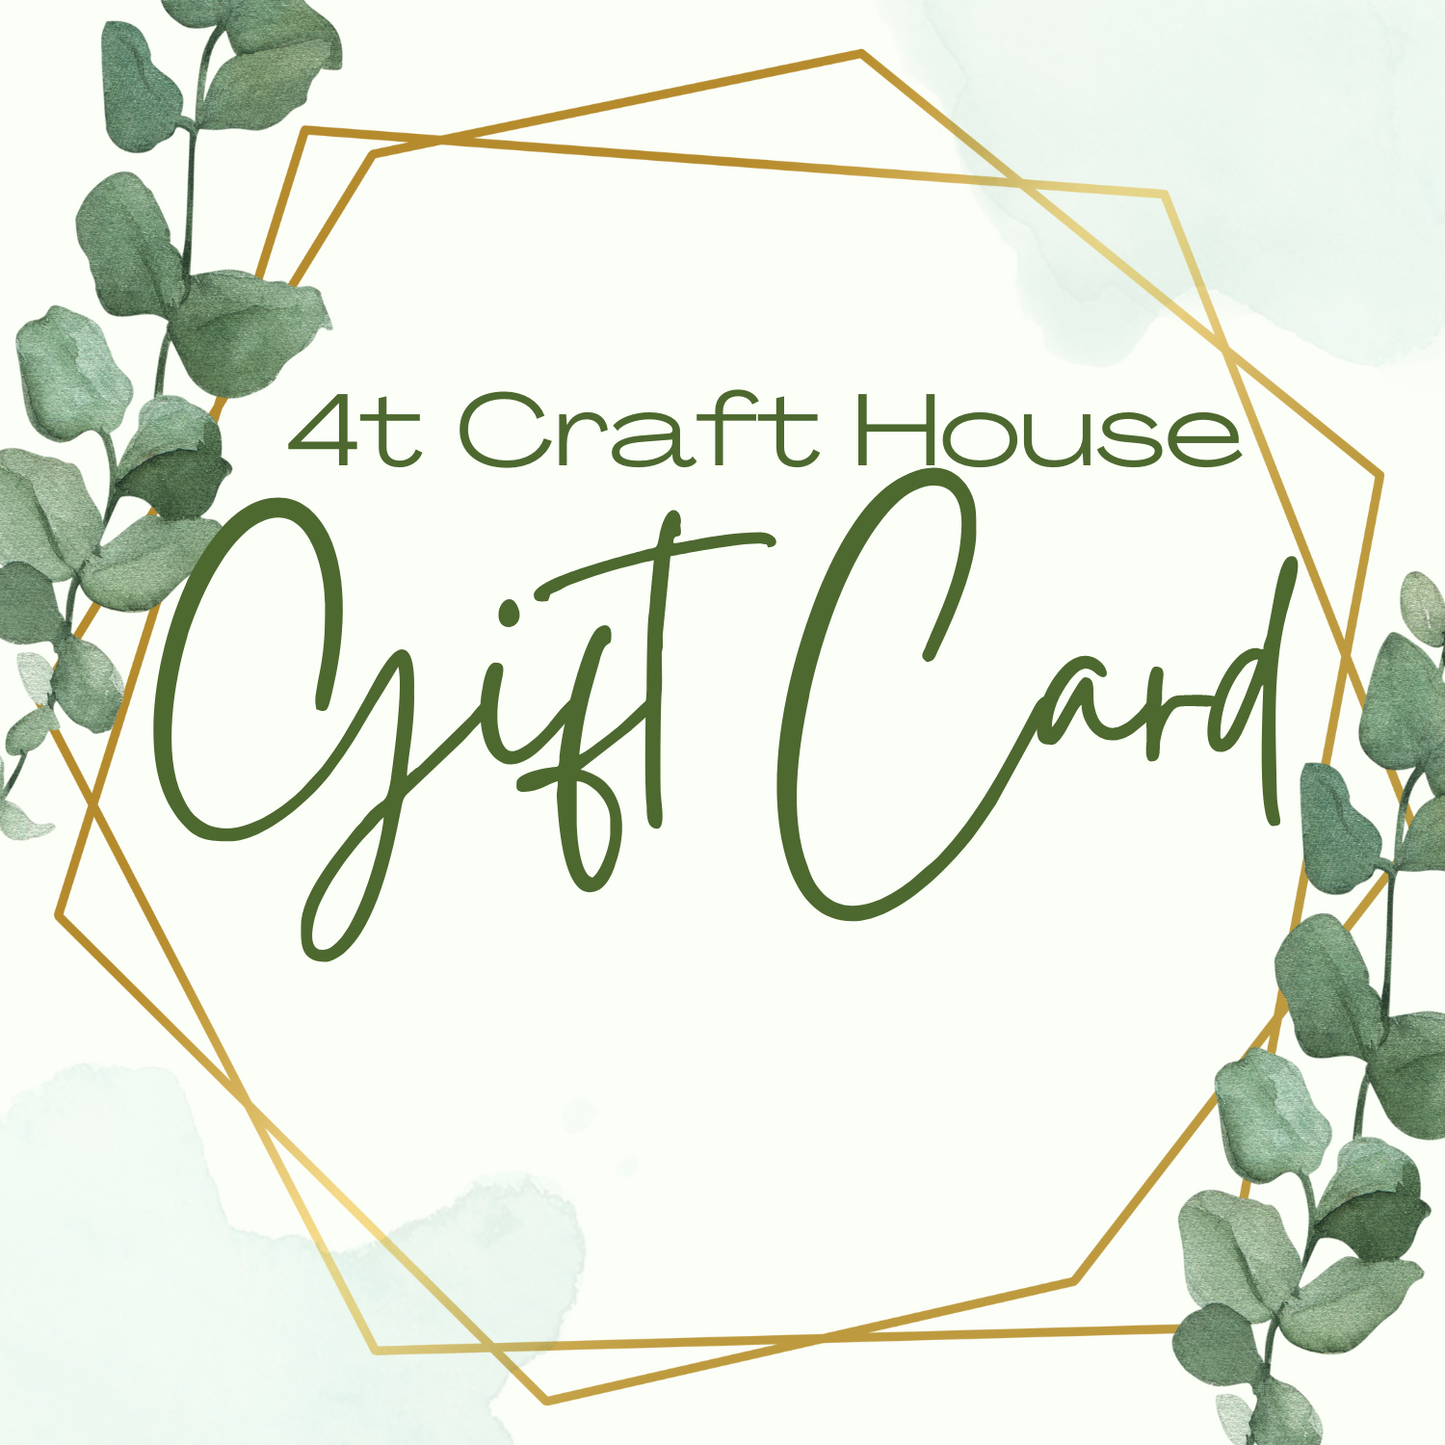 4t Craft House Gift Card